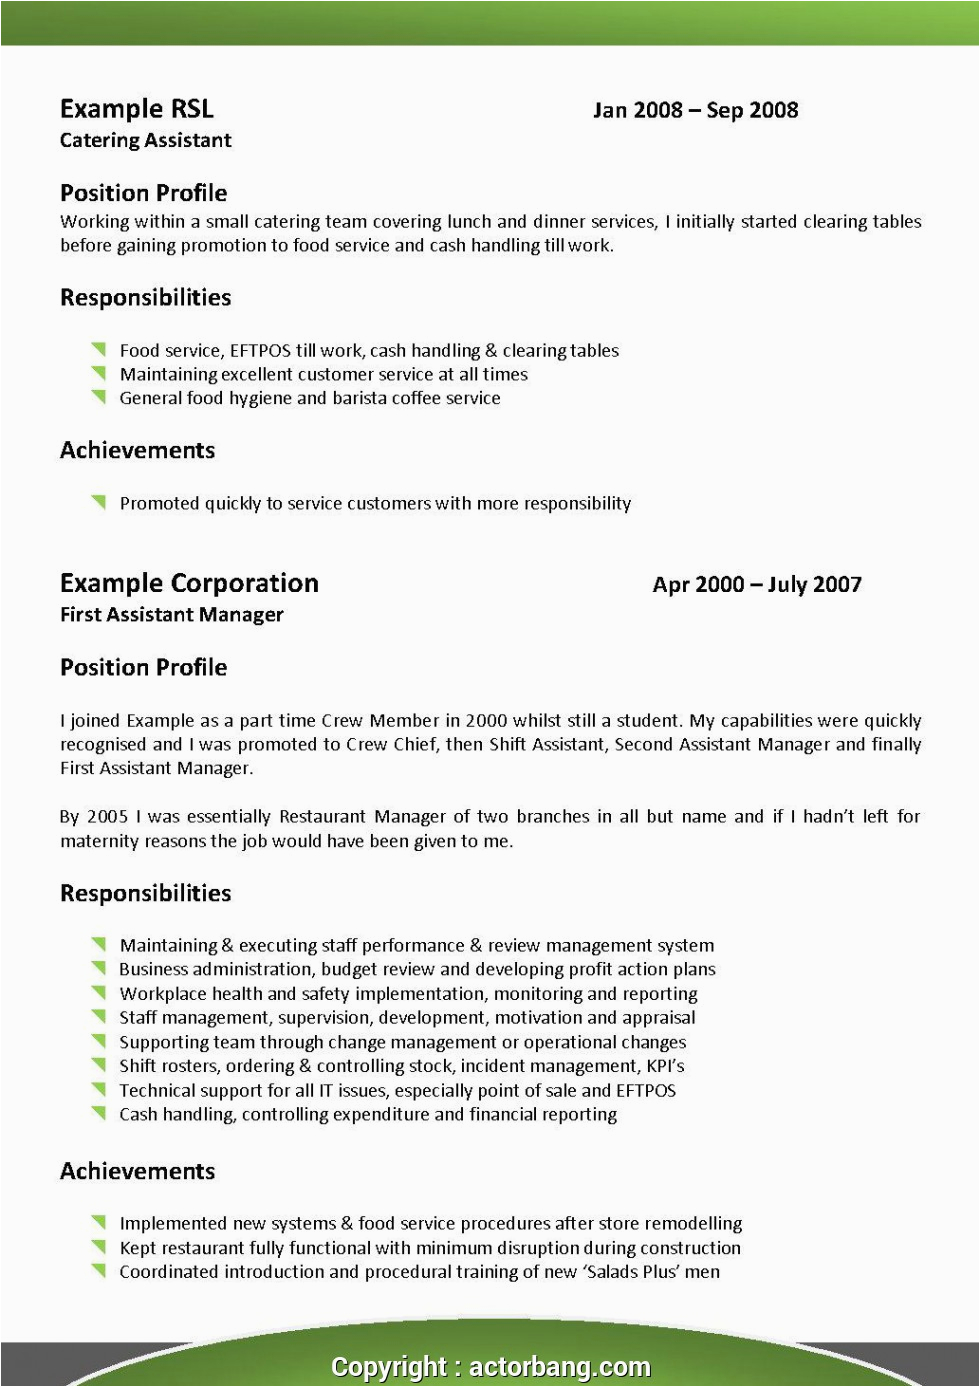 Sample Resume Objectives for Hospitality Industry Styles Sample Resume Objectives for Hospitality Industry